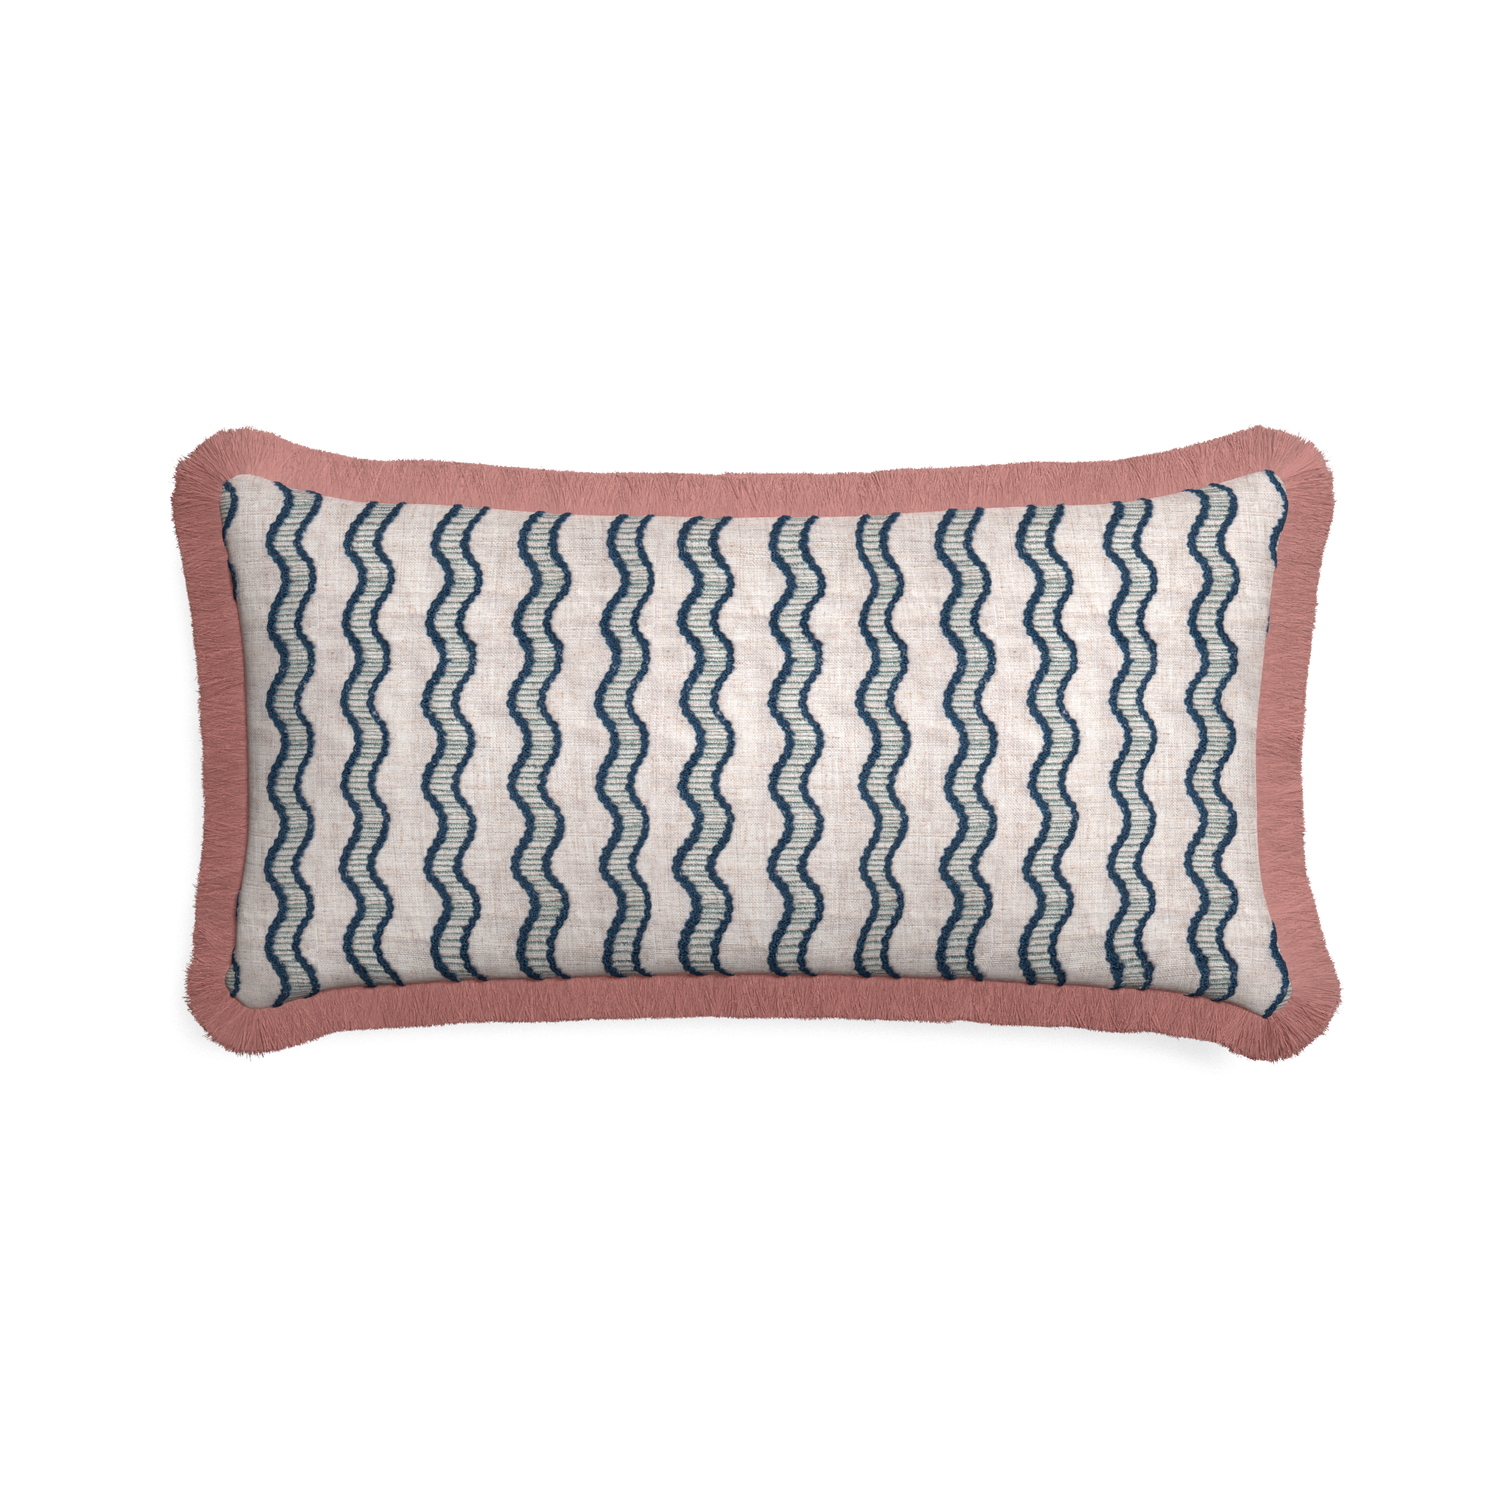 Midi-lumbar beatrice custom embroidered wavepillow with d fringe on white background